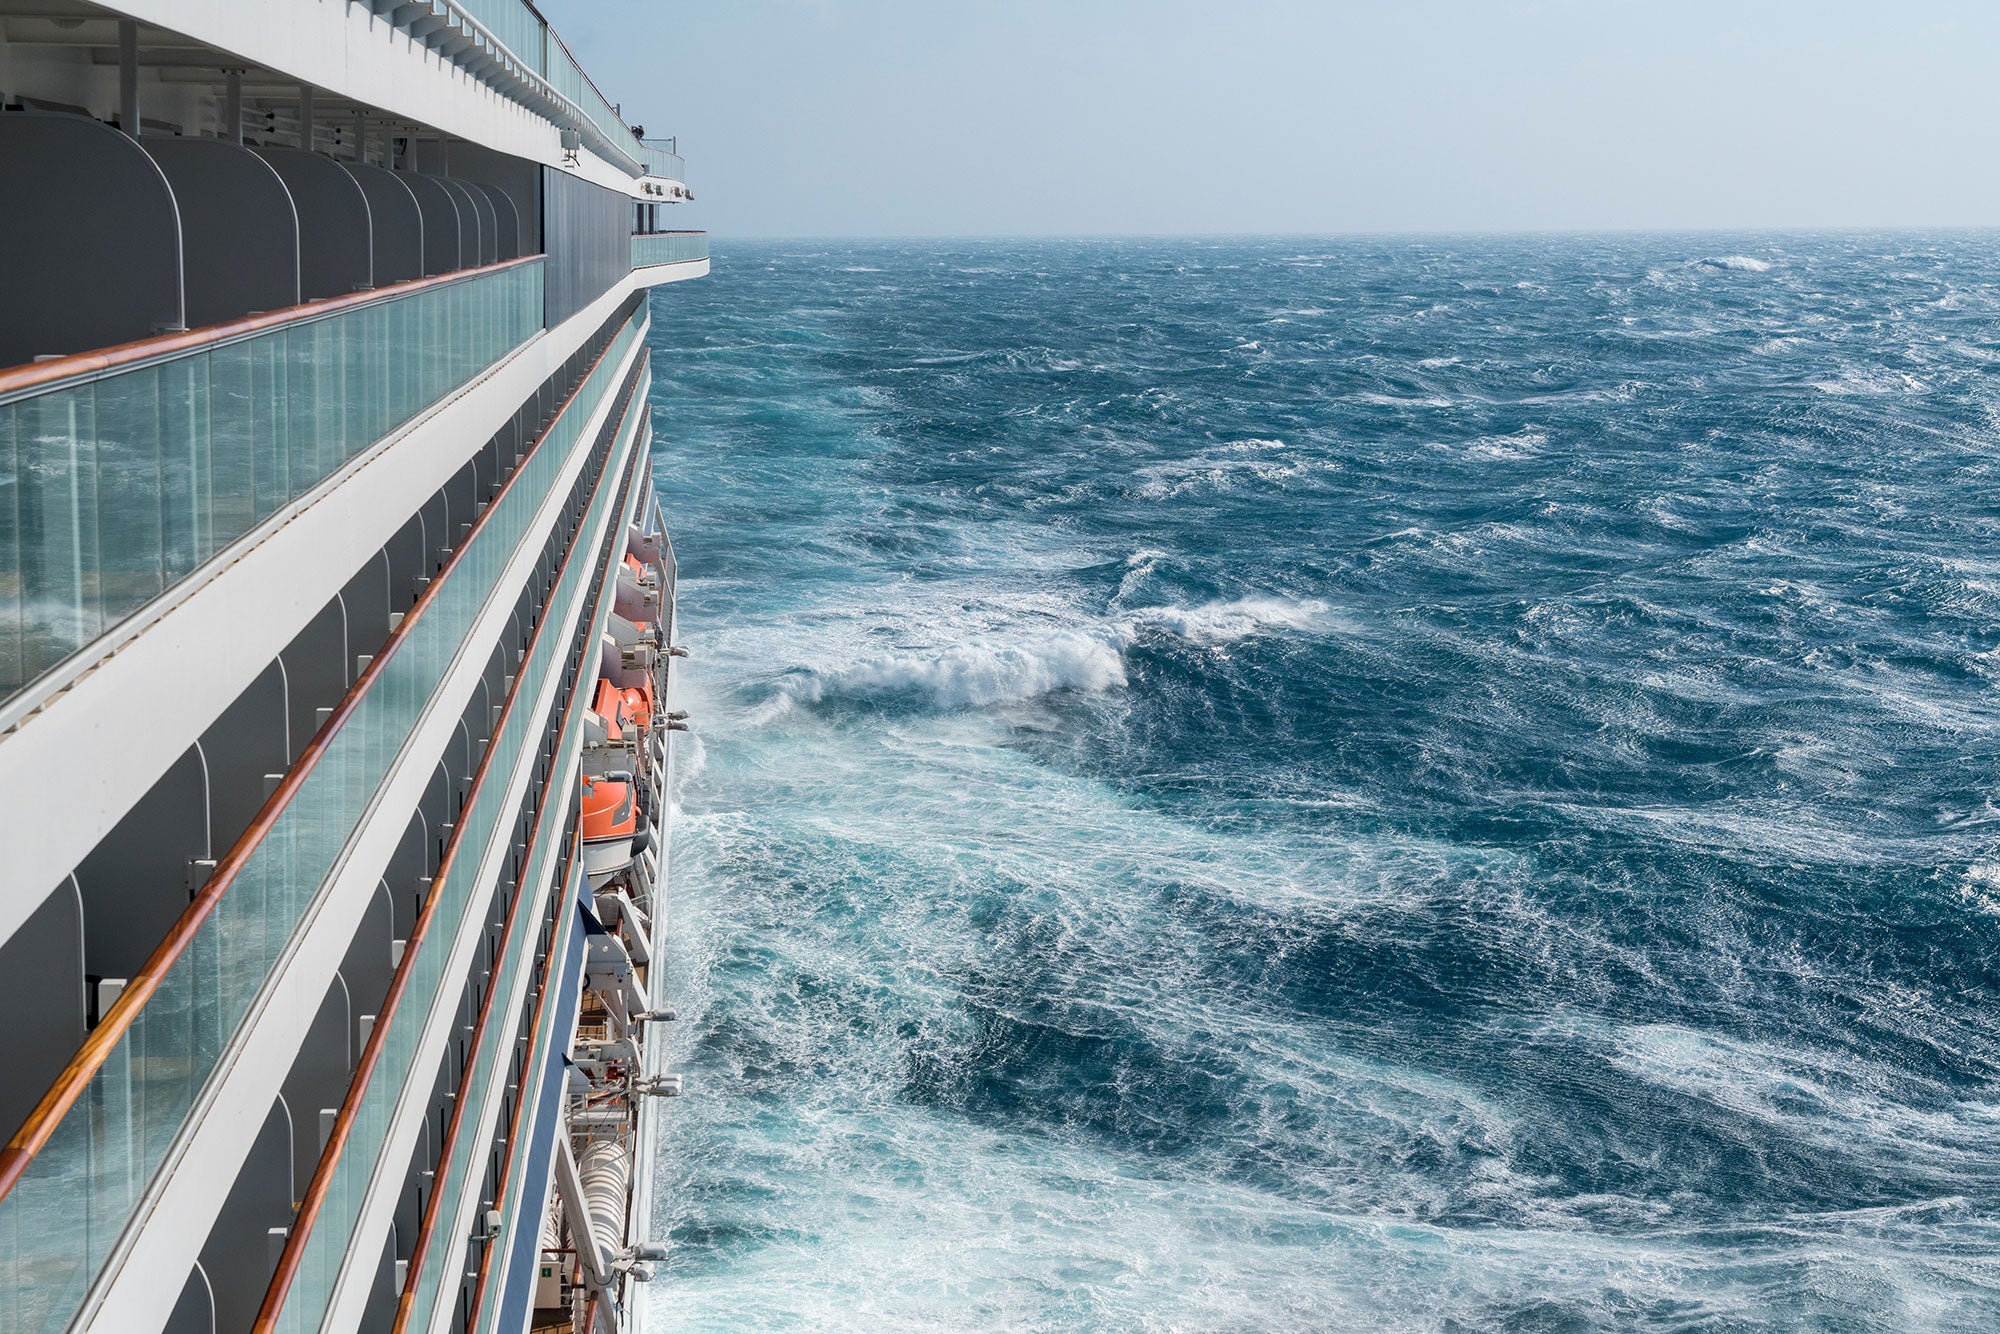 Bonus vacation or choppy nightmare? Here's what it's like on a cruise ship stuck..